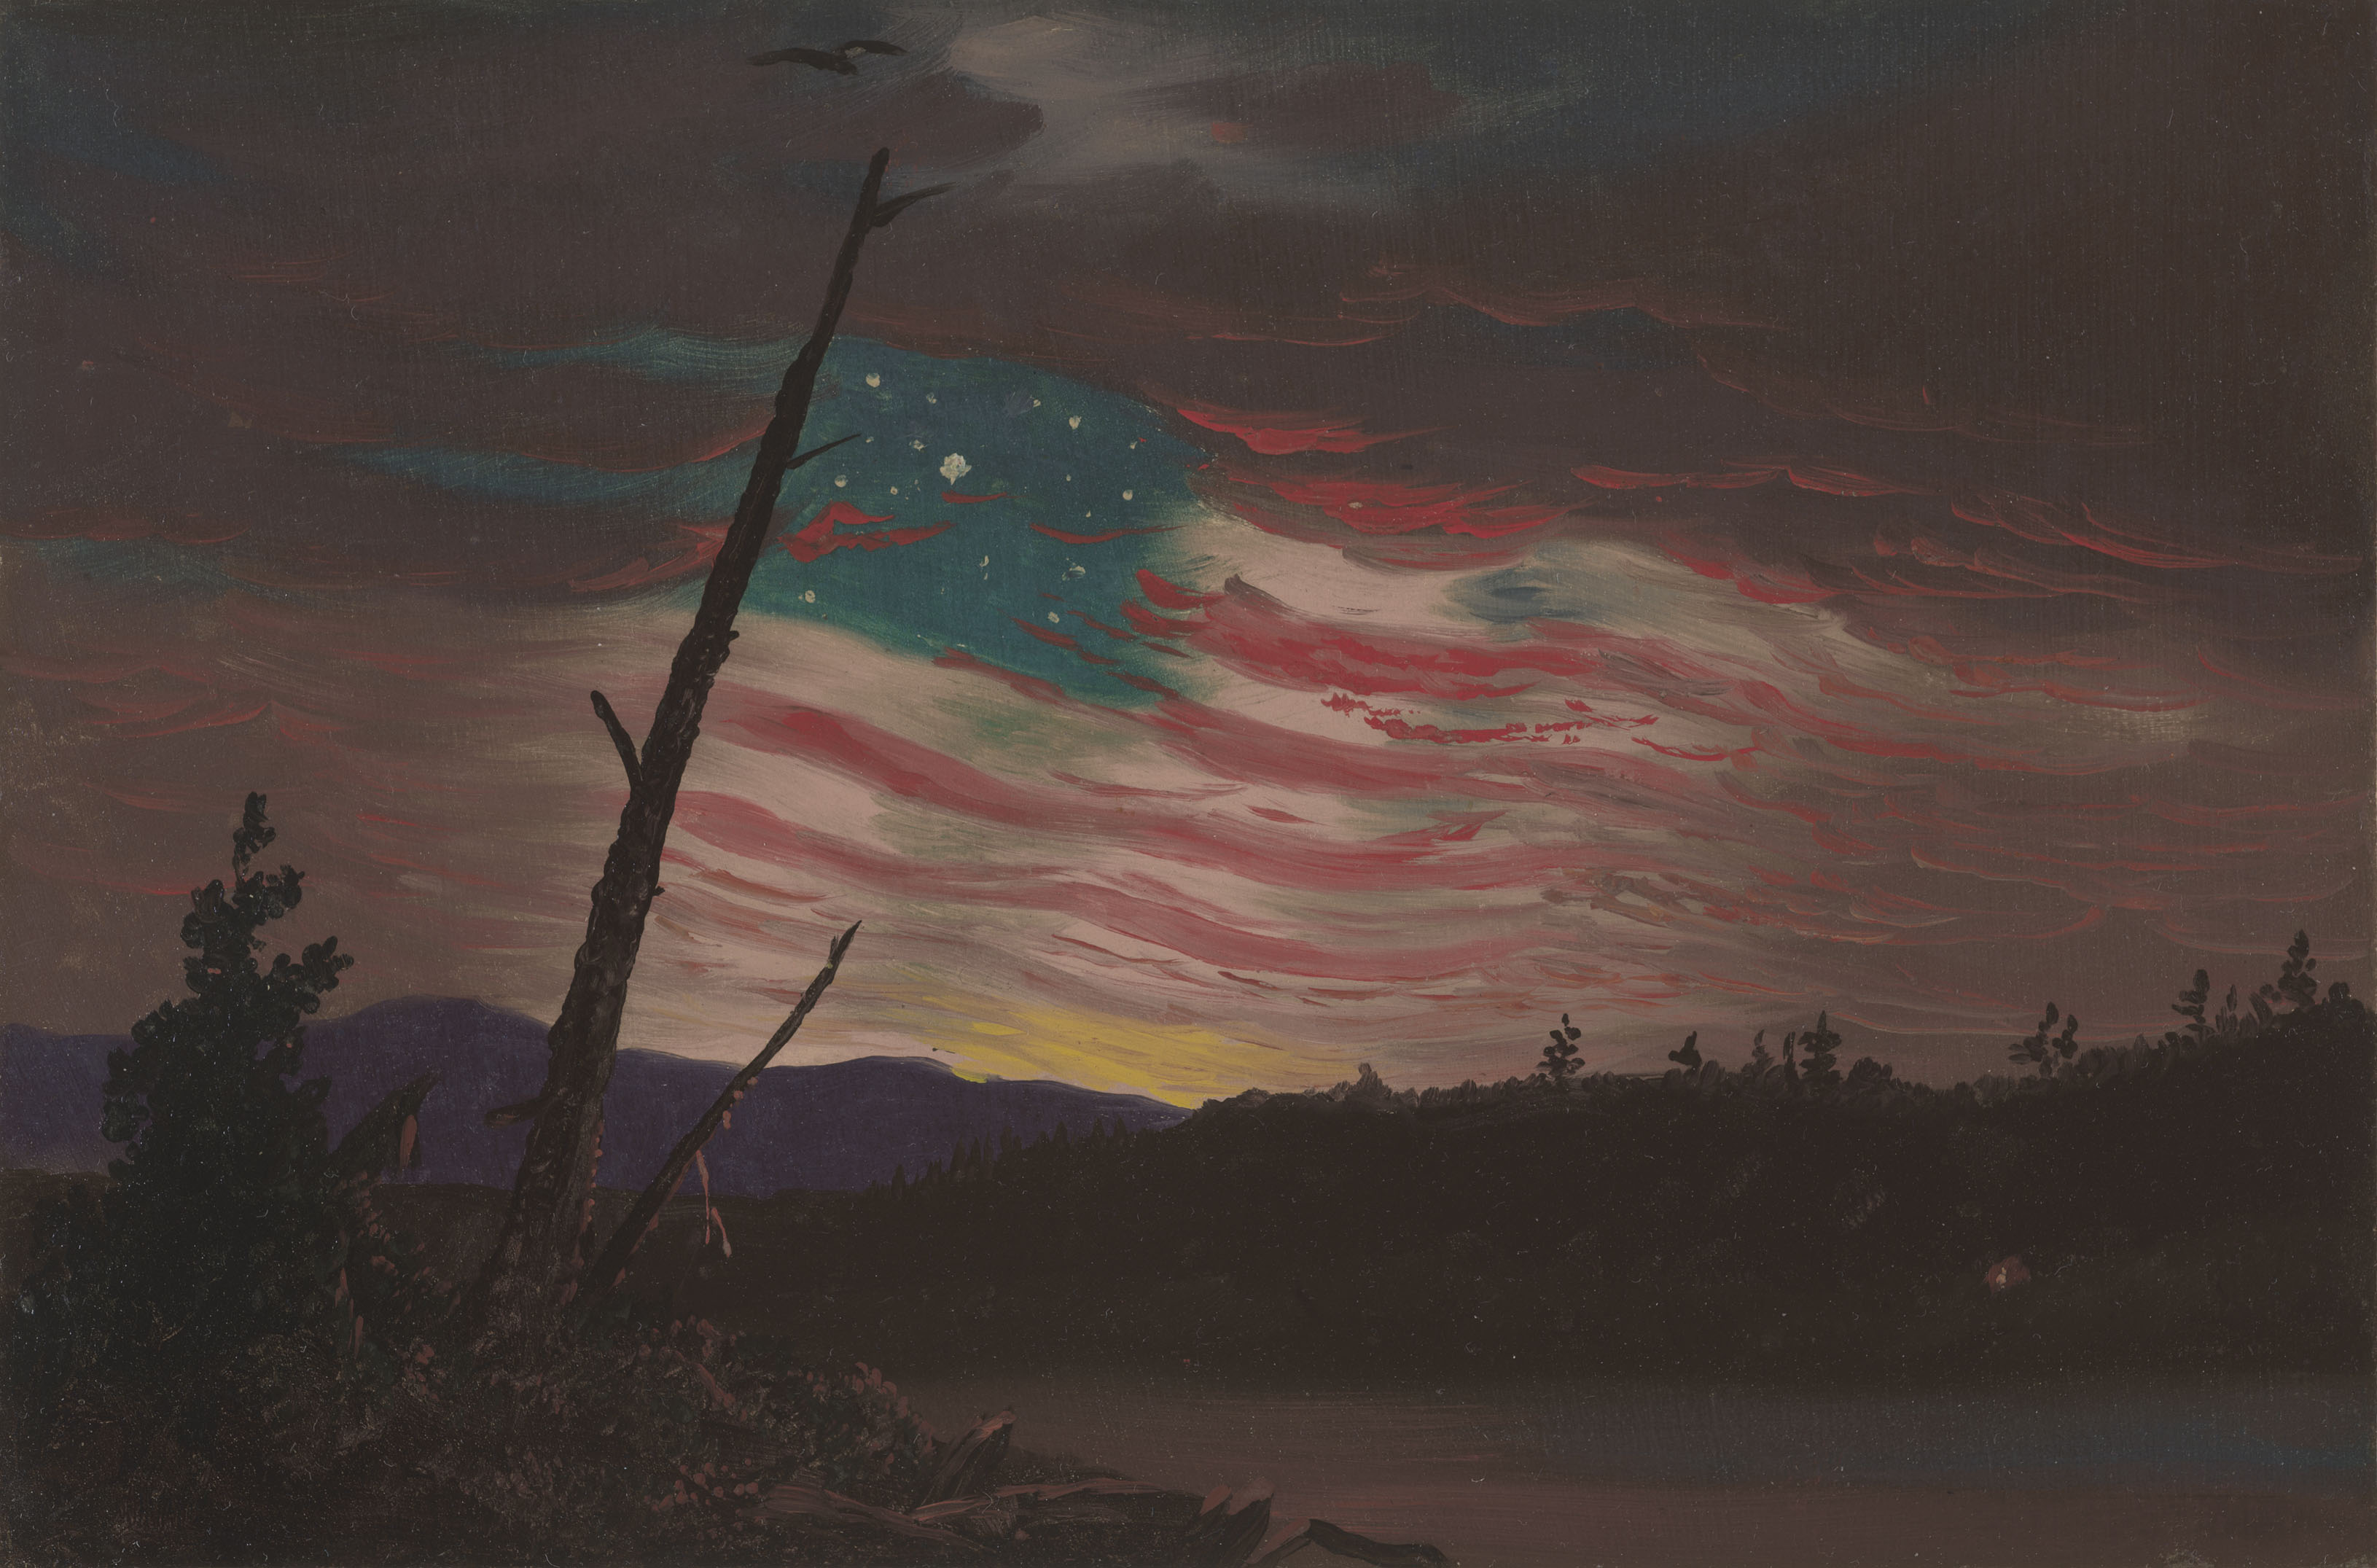 Our Banner in the Sky by Frederic Edwin Church (attrib. to)